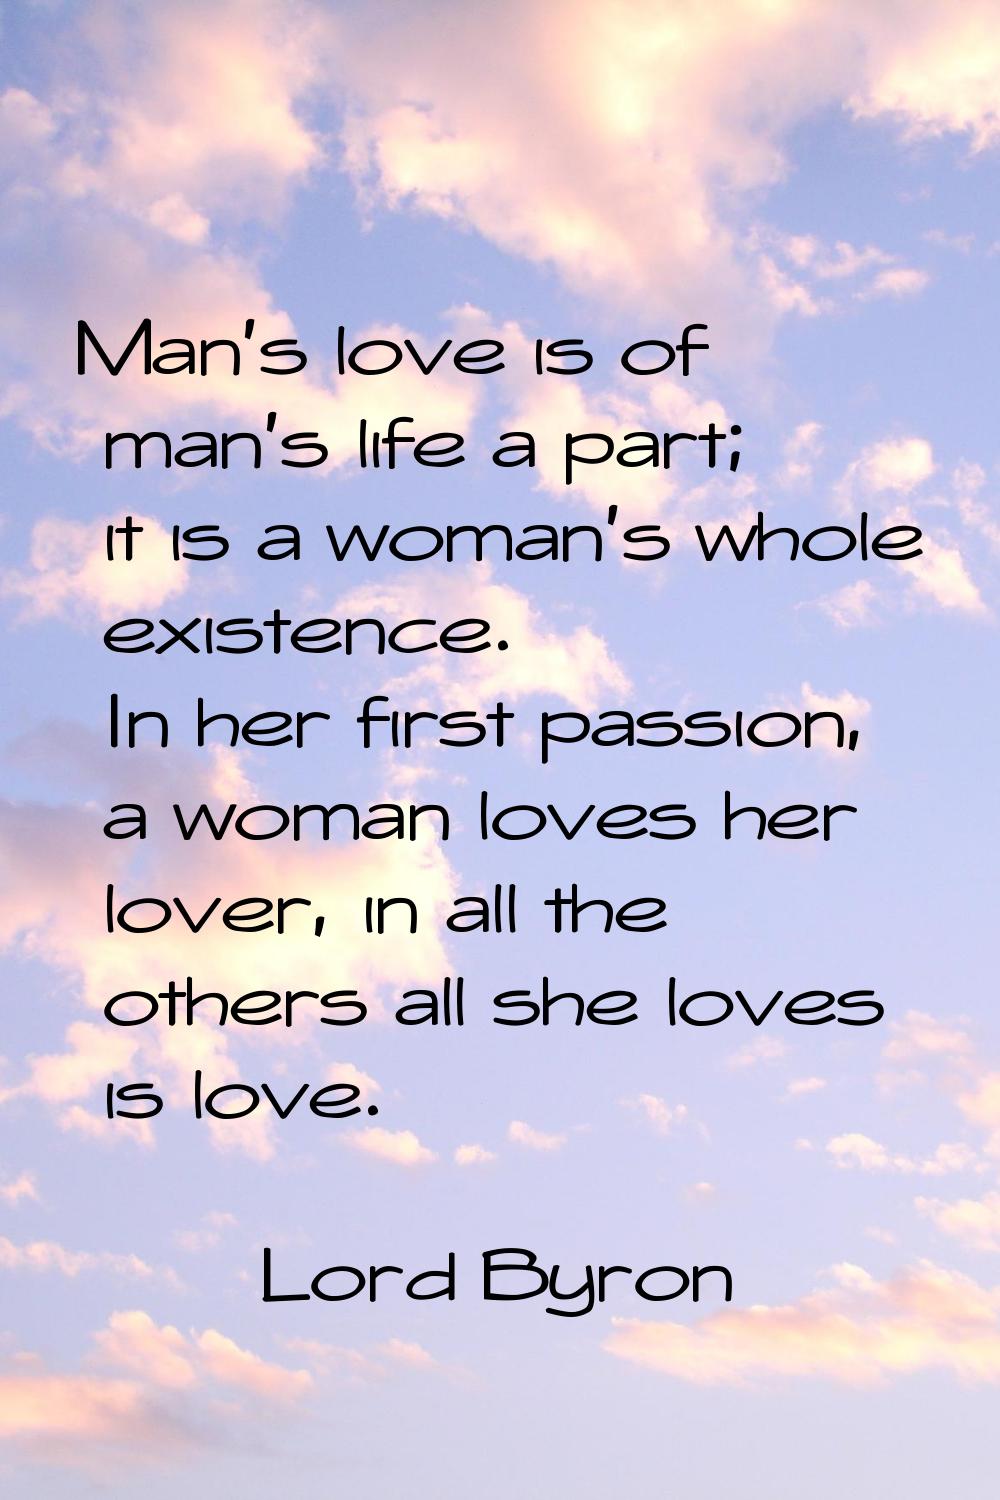 Man's love is of man's life a part; it is a woman's whole existence. In her first passion, a woman 